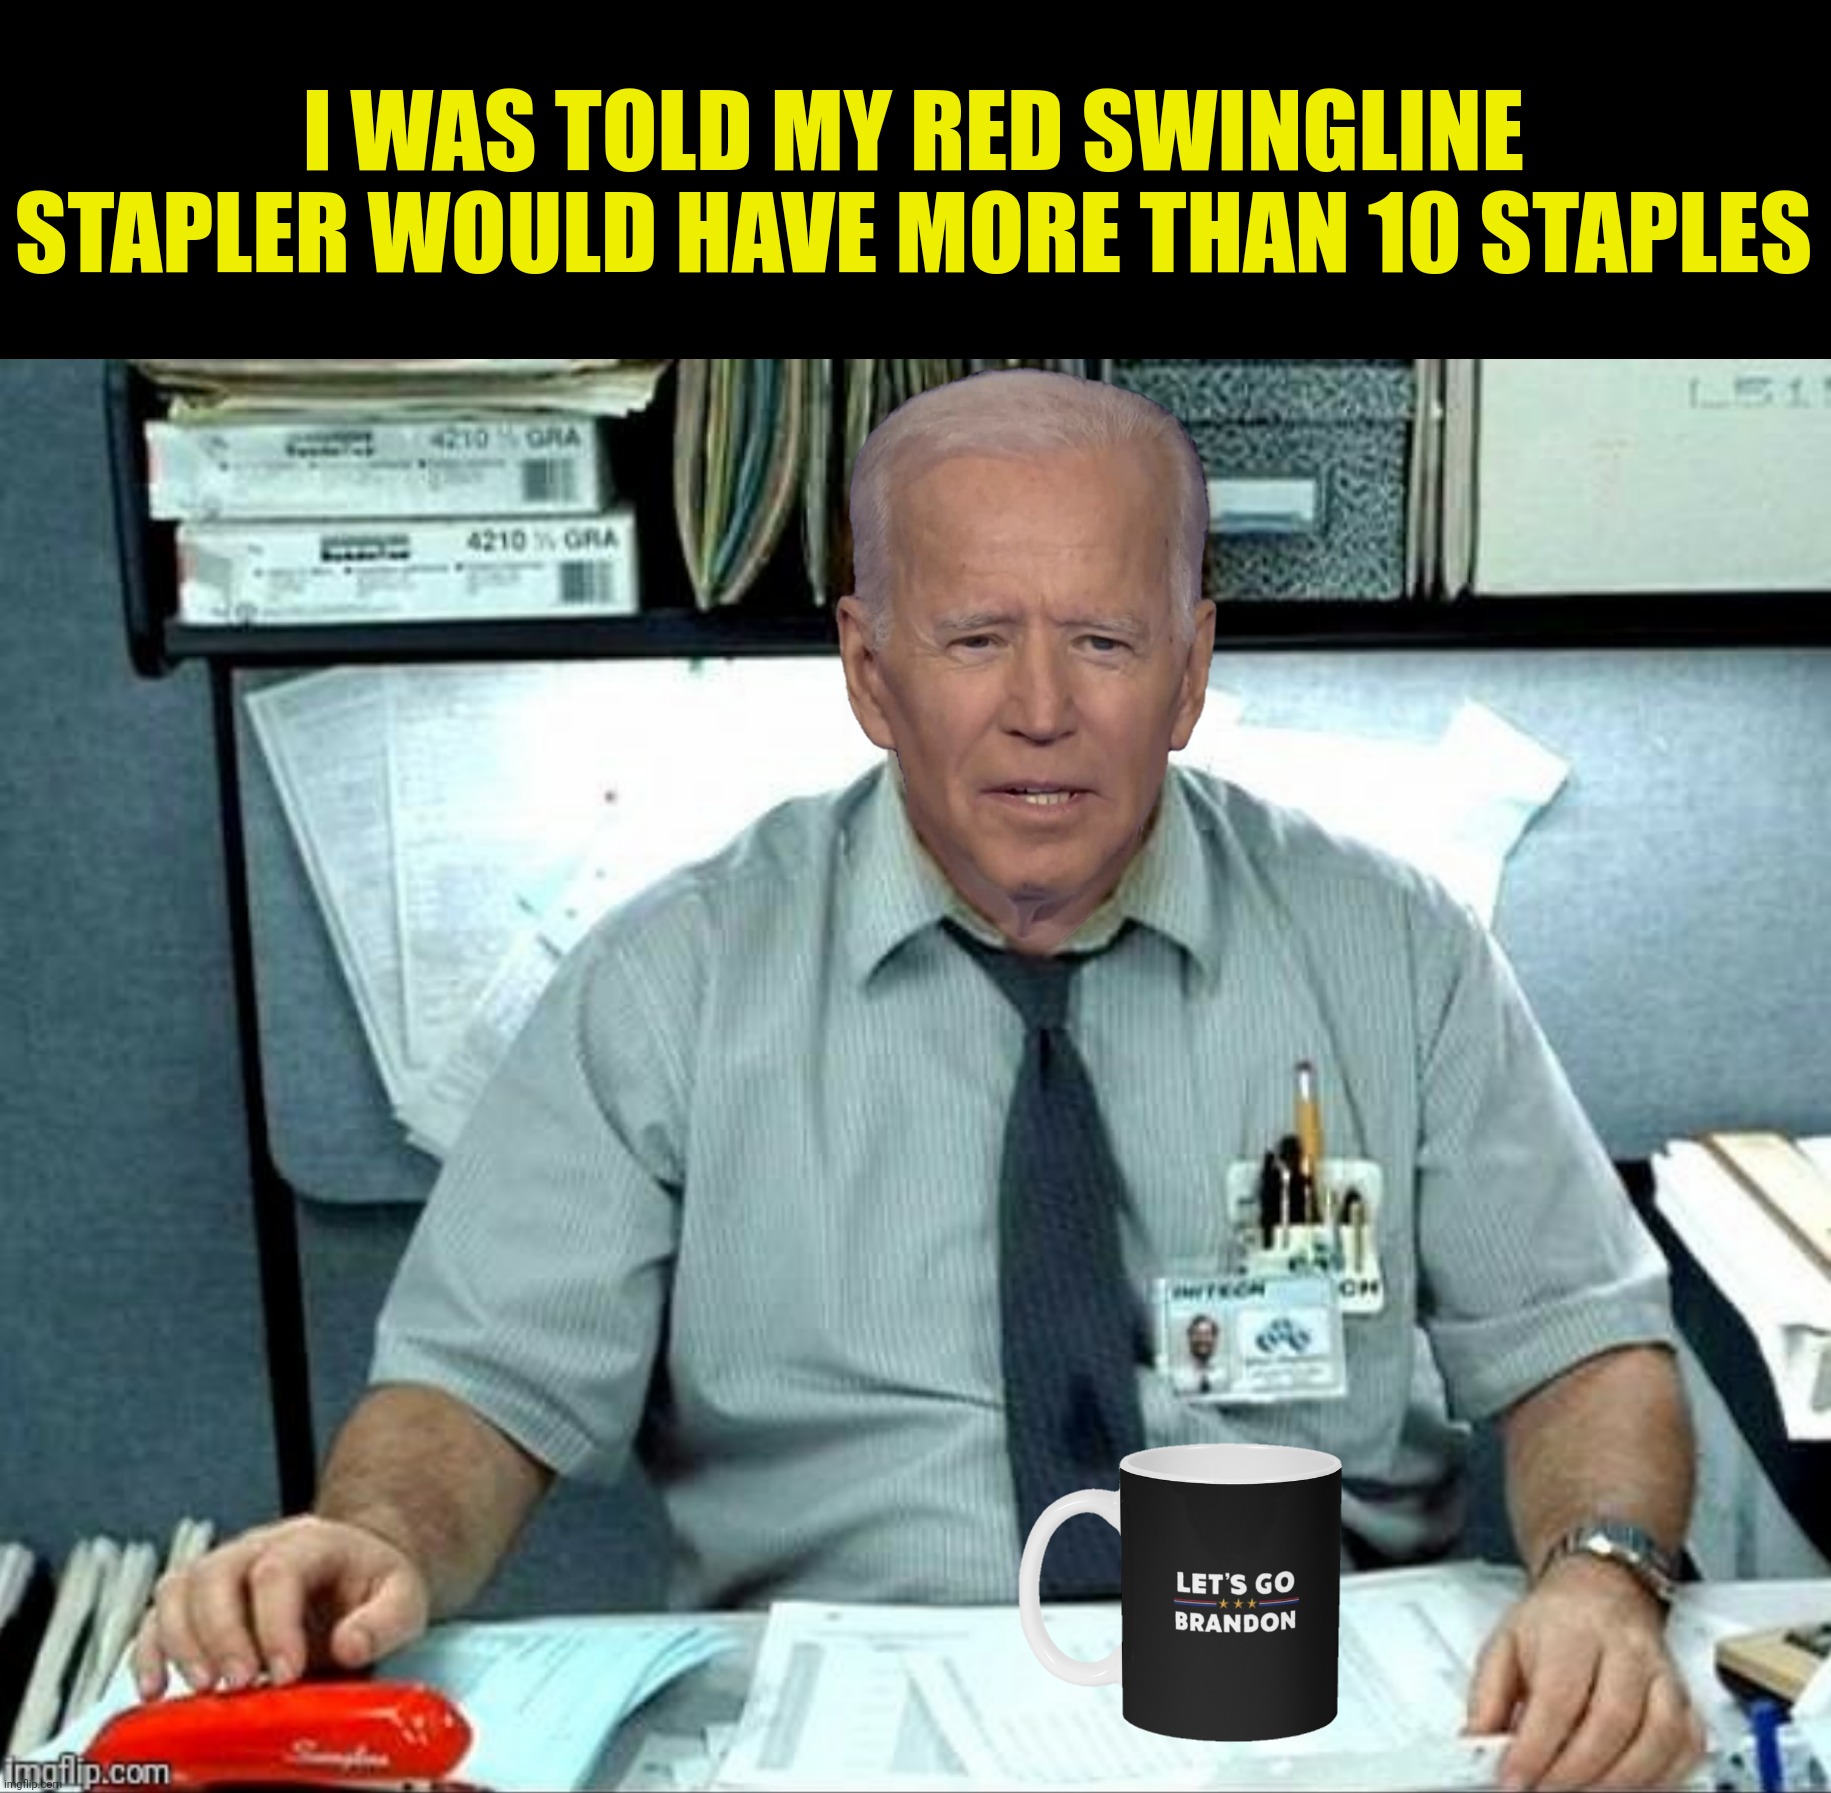 I WAS TOLD MY RED SWINGLINE STAPLER WOULD HAVE MORE THAN 10 STAPLES | made w/ Imgflip meme maker